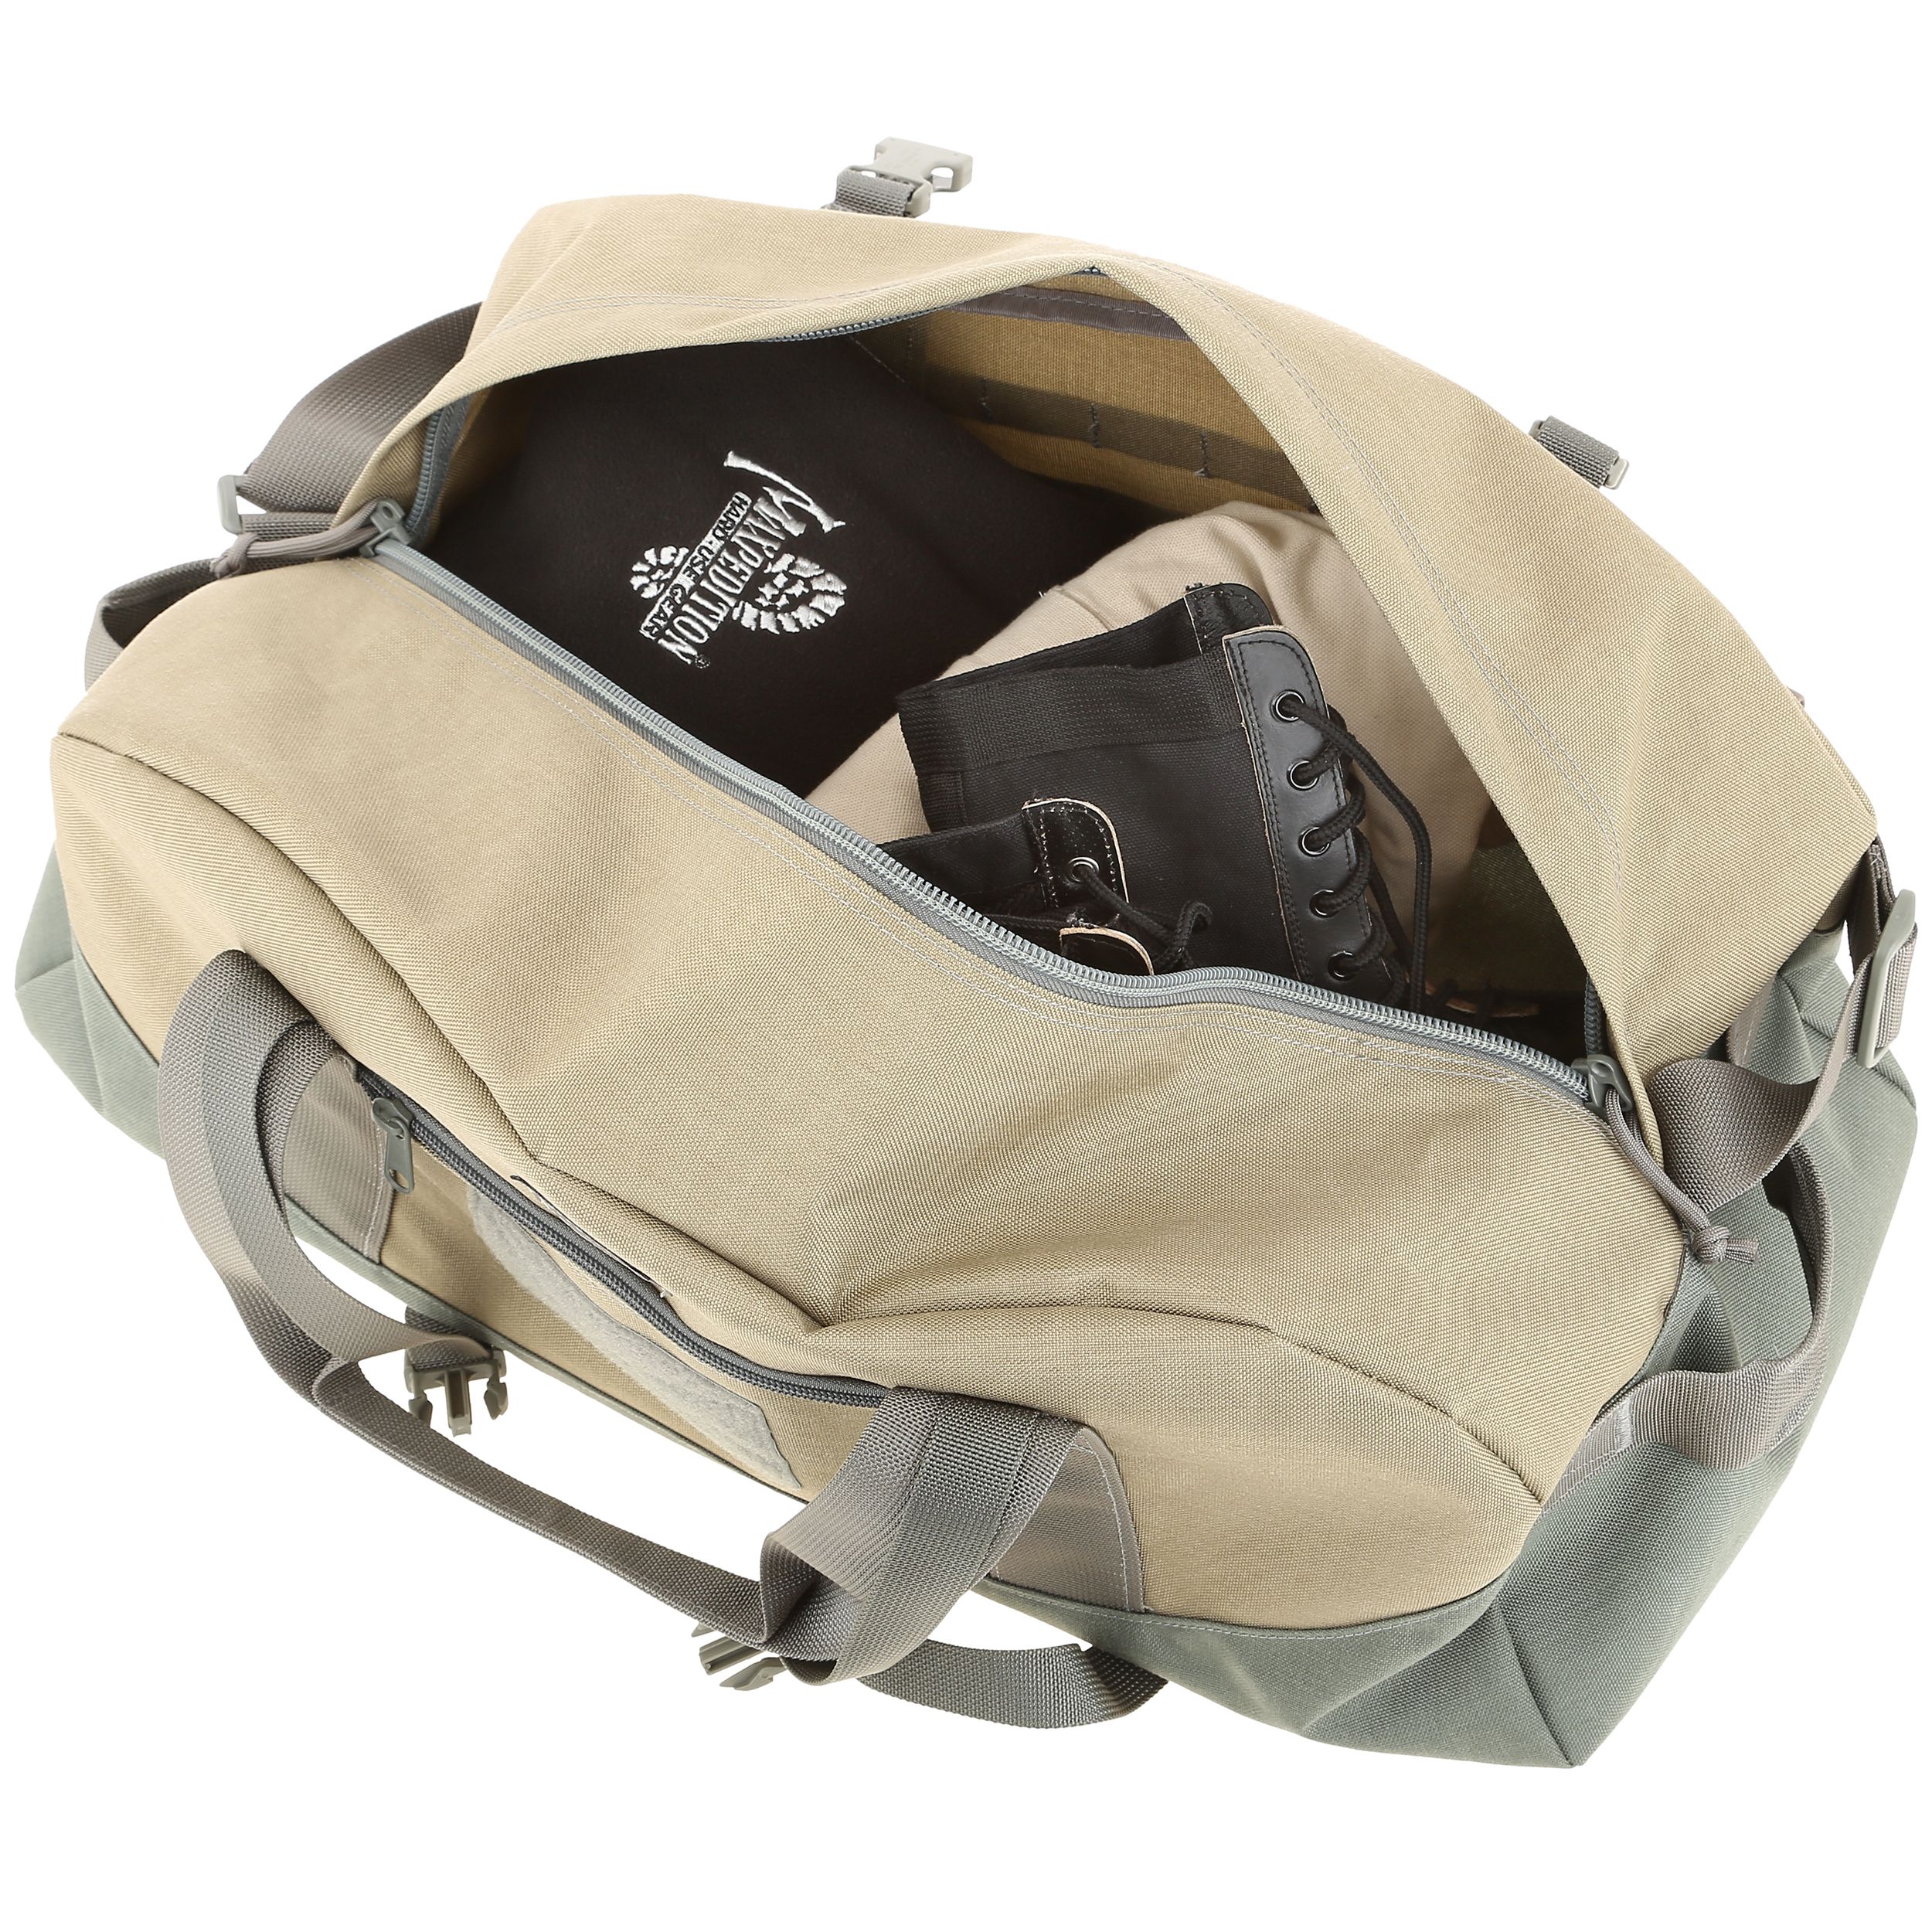 Maxpedition 2126W Baron Load-Out Duffel V2 Bag, Wolf Gray